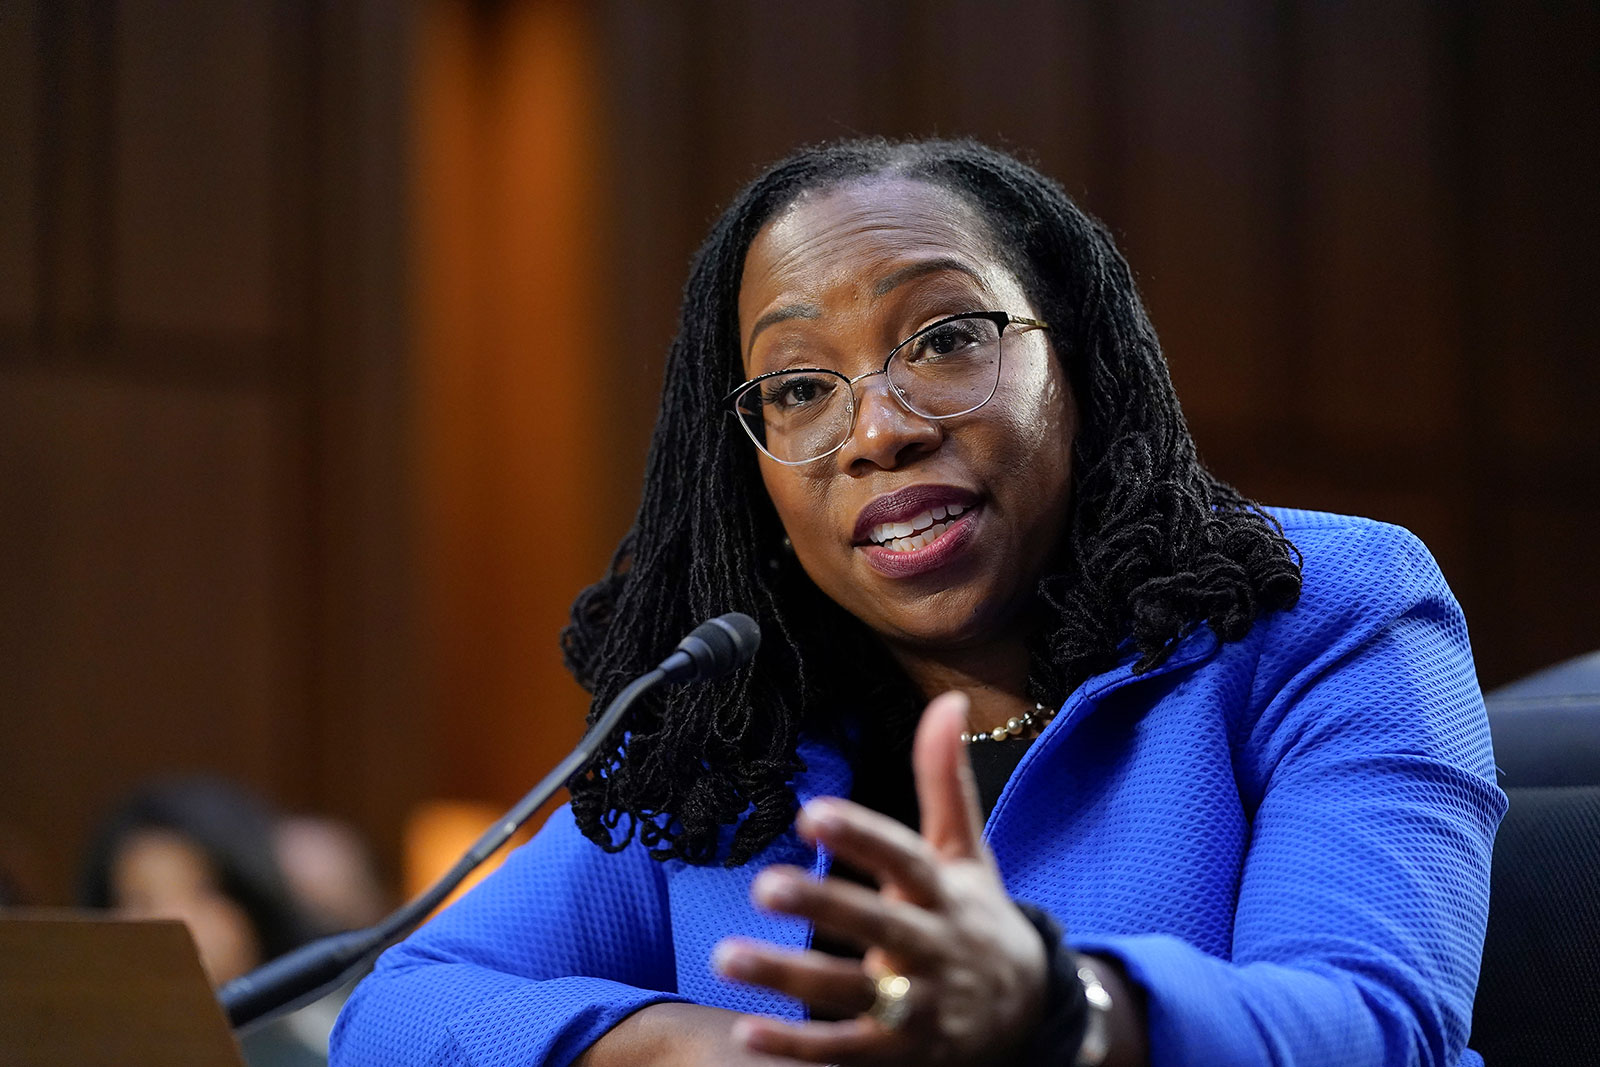 Supreme Court nominee Judge Ketanji Brown Jackson testifies during her Senate Judiciary Committee confirmation hearing on Capitol Hill in Washington, DC, on March 23.